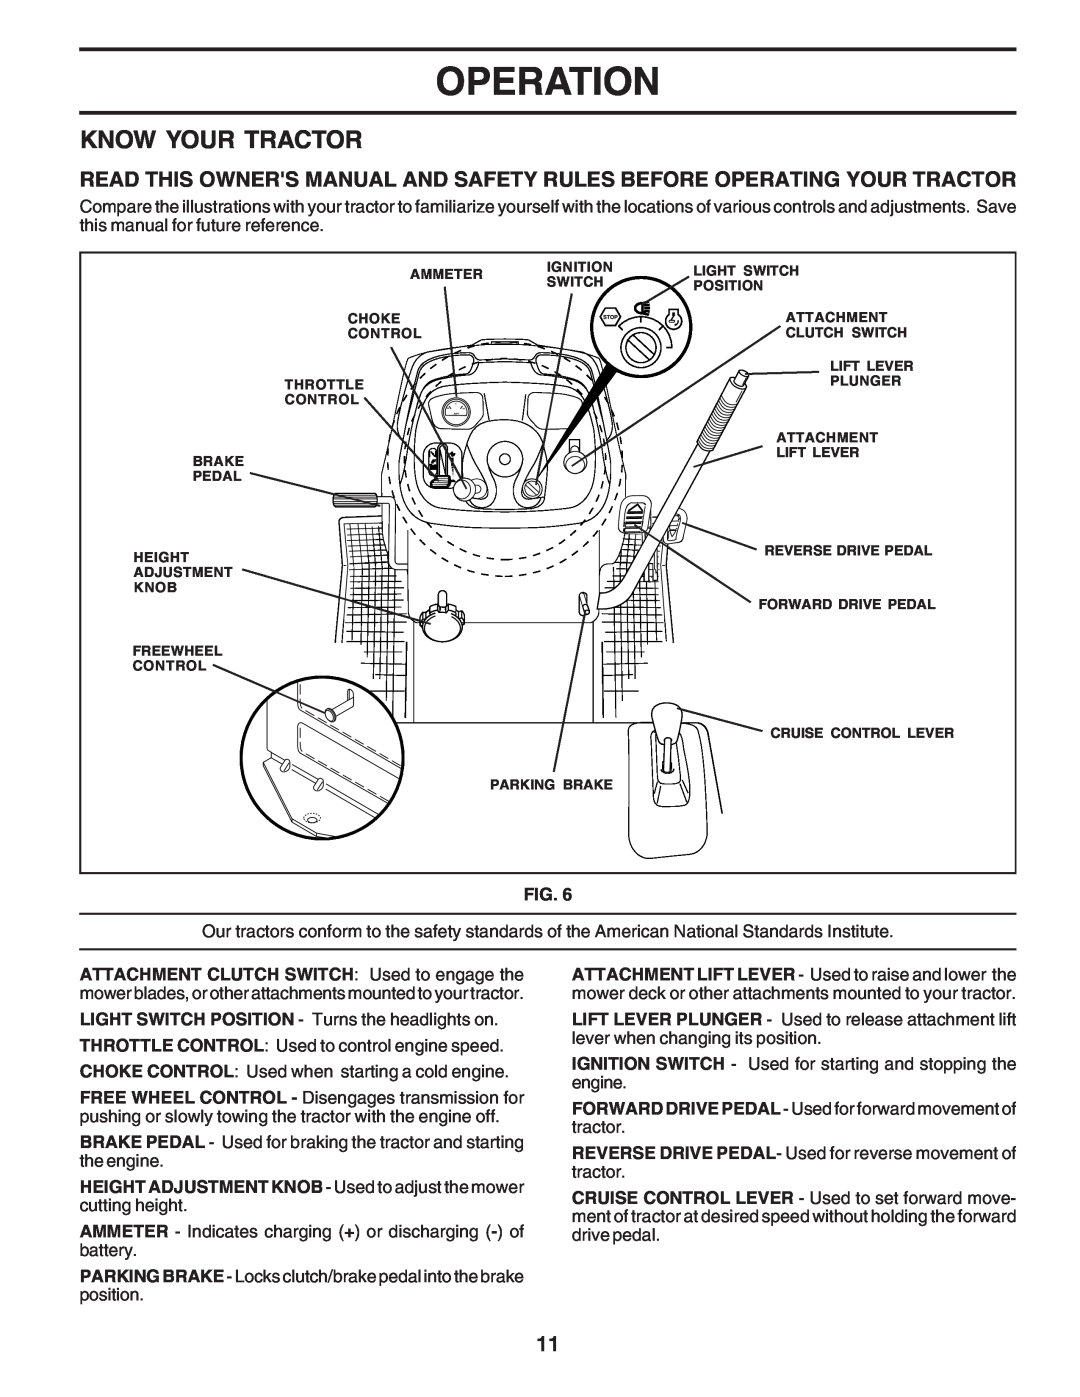 Poulan 183284 owner manual Know Your Tractor, Operation, HEIGHT ADJUSTMENT KNOB - Used to adjust the mower cutting height 